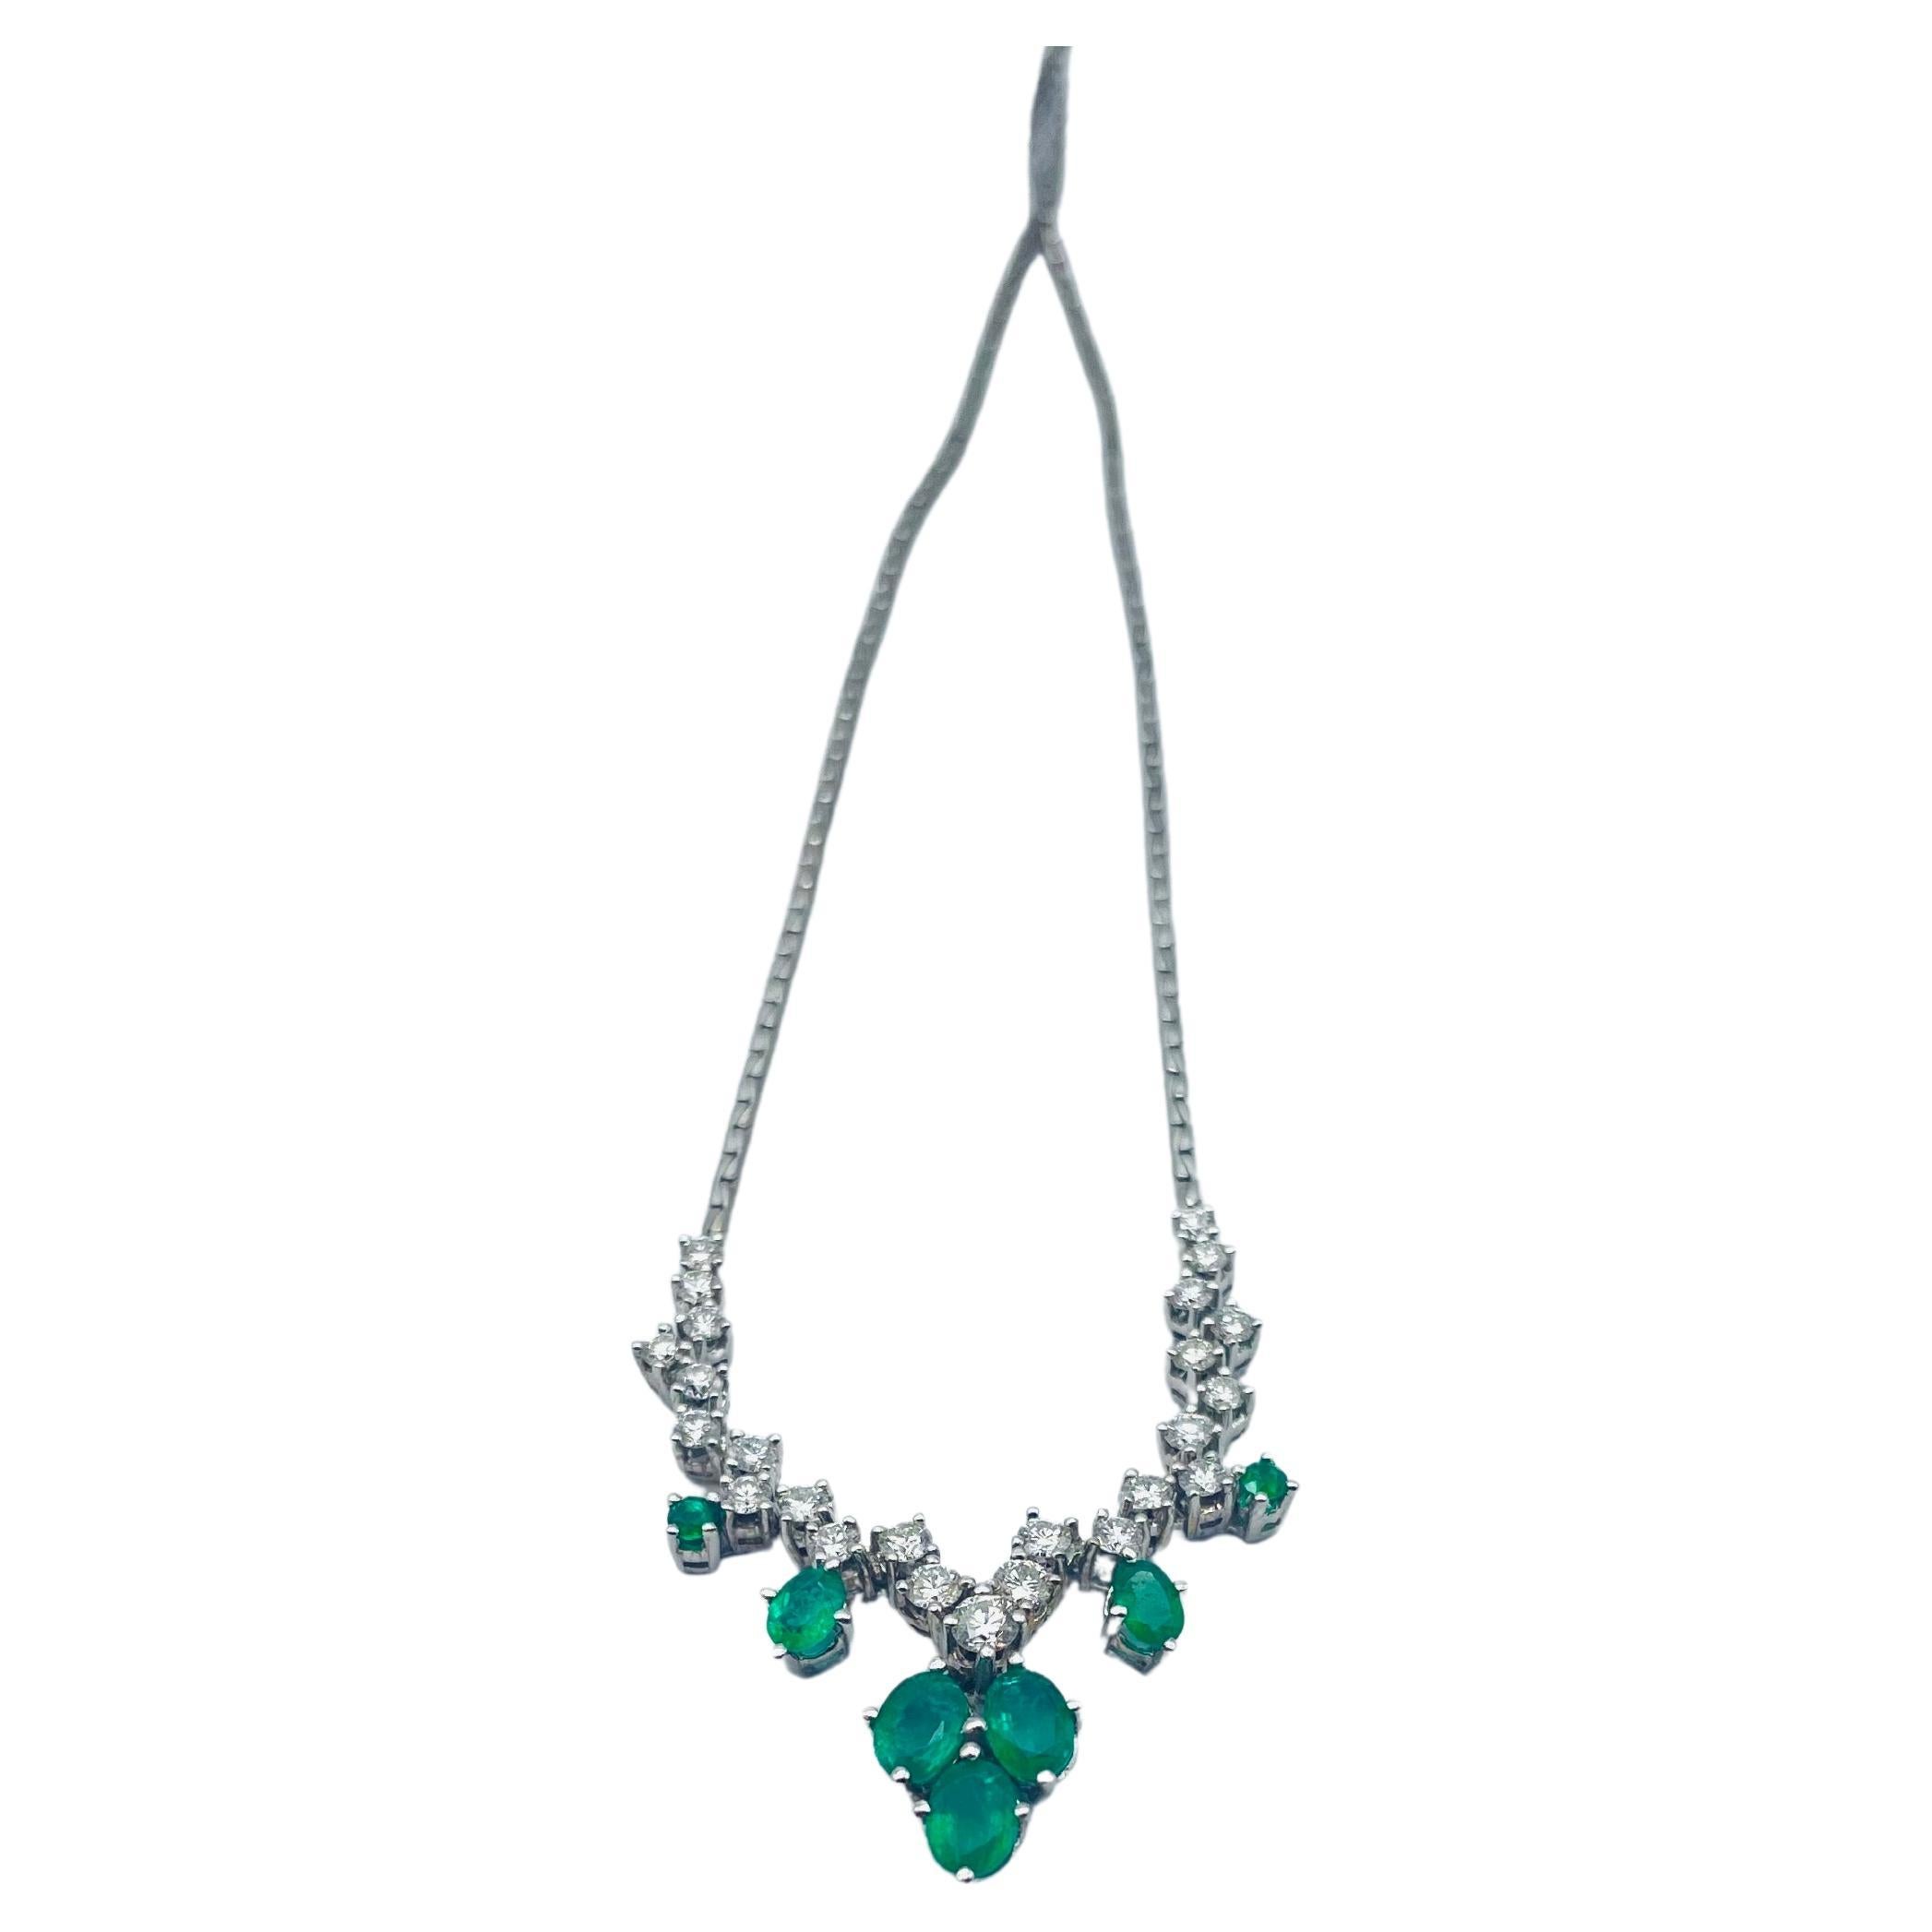 Exquisite 18k White Gold Necklace emeralds and diamonds 2